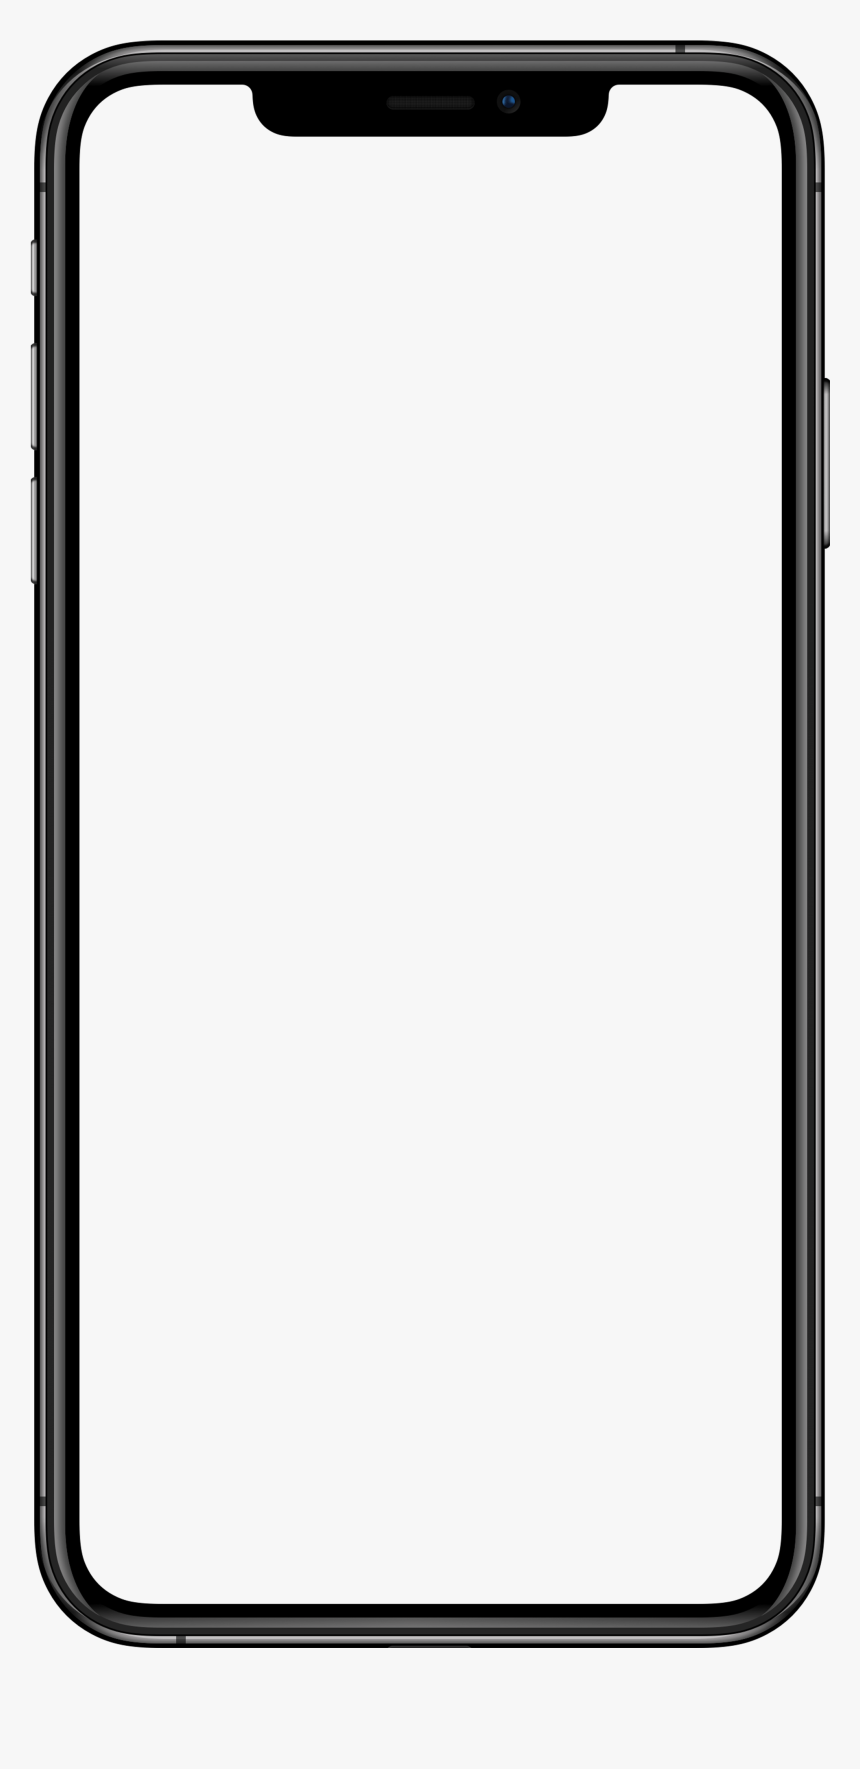 Apple Iphone Xs Max Iphone 5s Smartphone - Iphone Xs Max Mockup Png